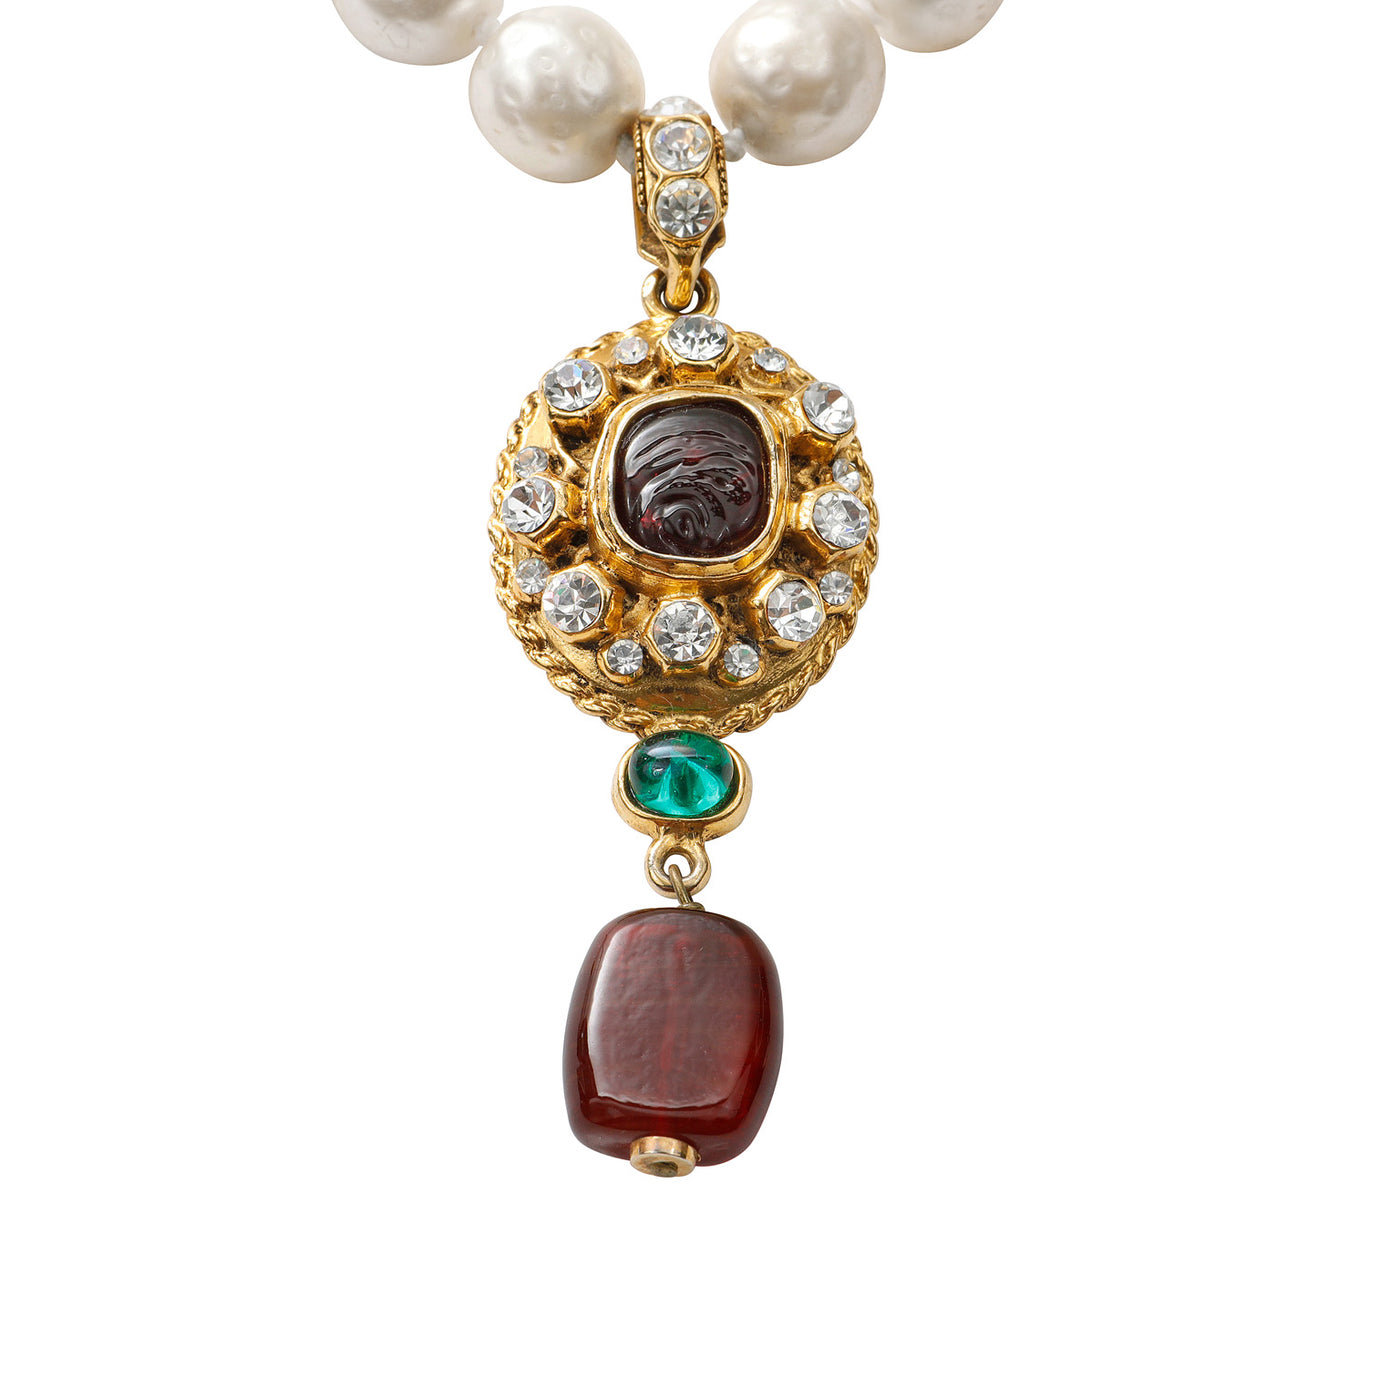 Chanel Vintage Pearl Choker with Gripoix Crystal Gold Pendant